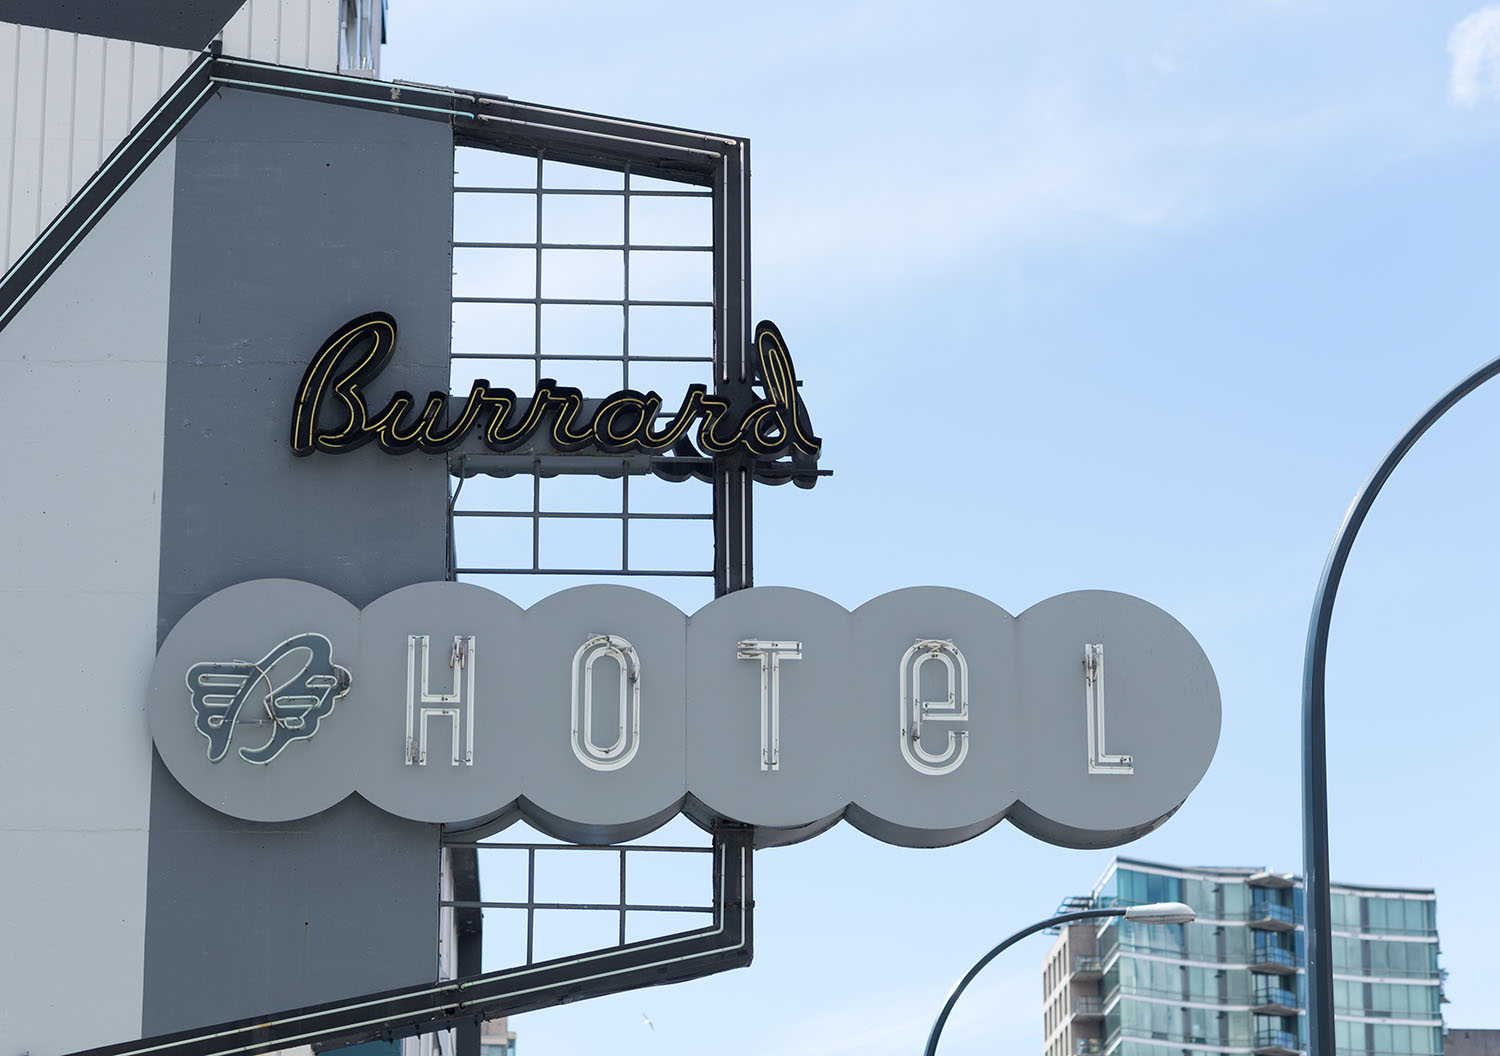 The vintage neon sign for The Burrard Hotel in Vancouver, as captured by Canadian travel blogger Cee Fardoe of Coco & Vera